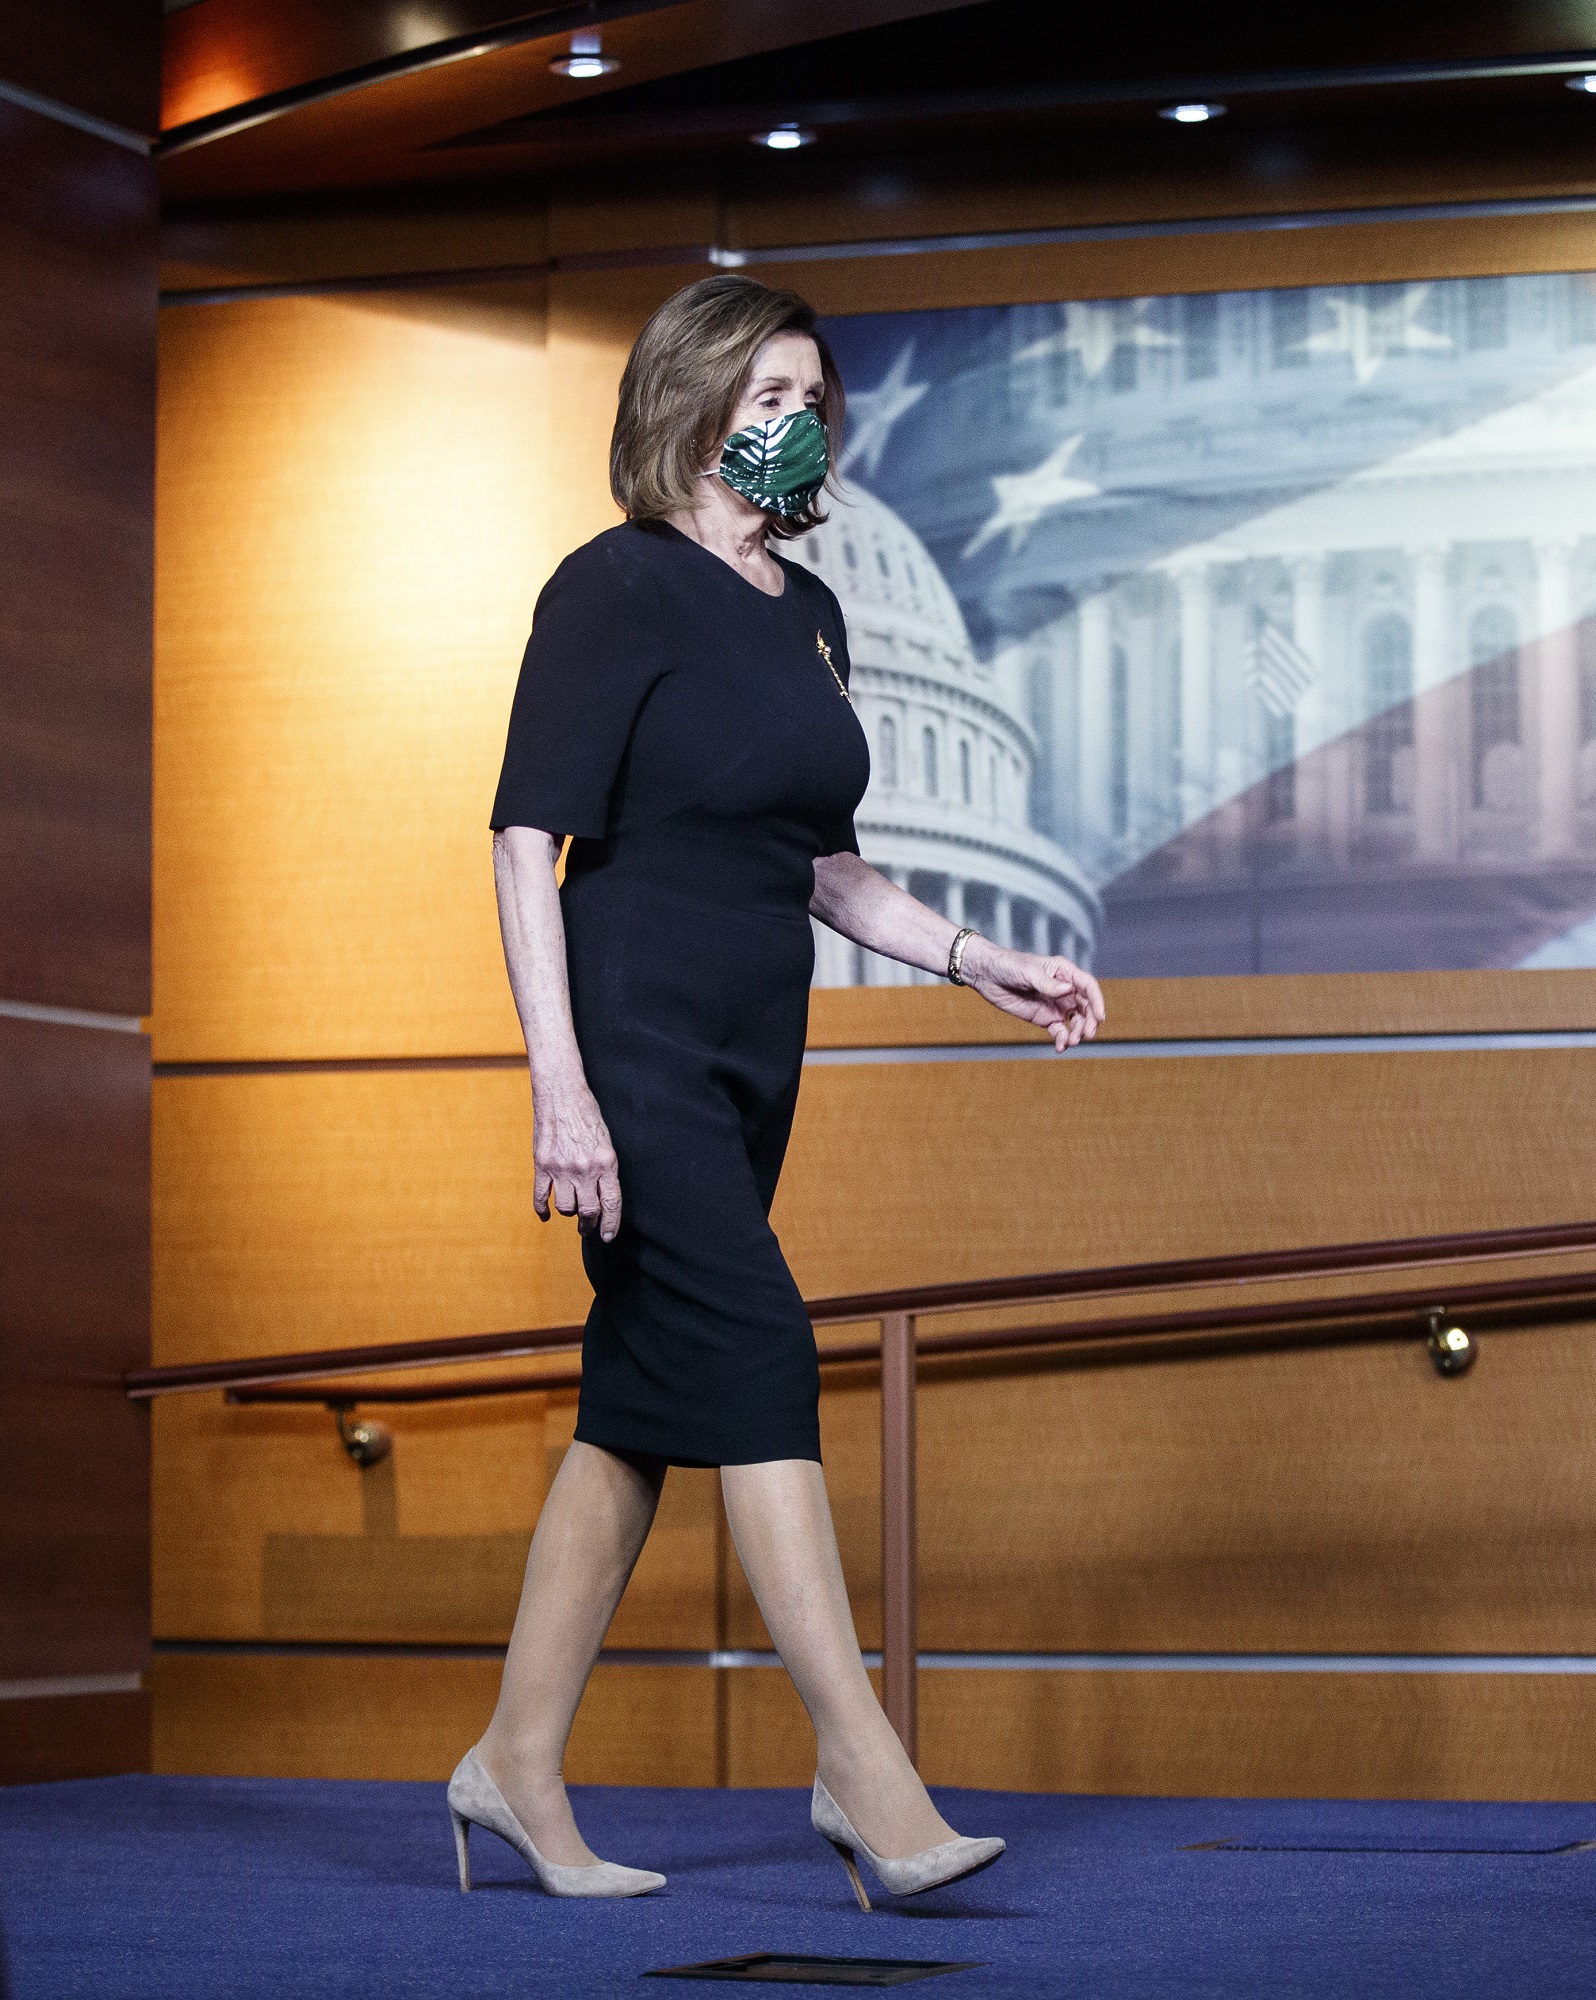 (200515) -- WASHINGTON D.C., May 15, 2020 (Xinhua) -- U.S. House Speaker Nancy Pelosi arrives for a press conference with a mask on the Capitol Hill in Washington D.C., the United States, on May 14, 2020.
  U.S. House Speaker Nancy Pelosi said on Thursday that the White House's rhetoric on China is a 